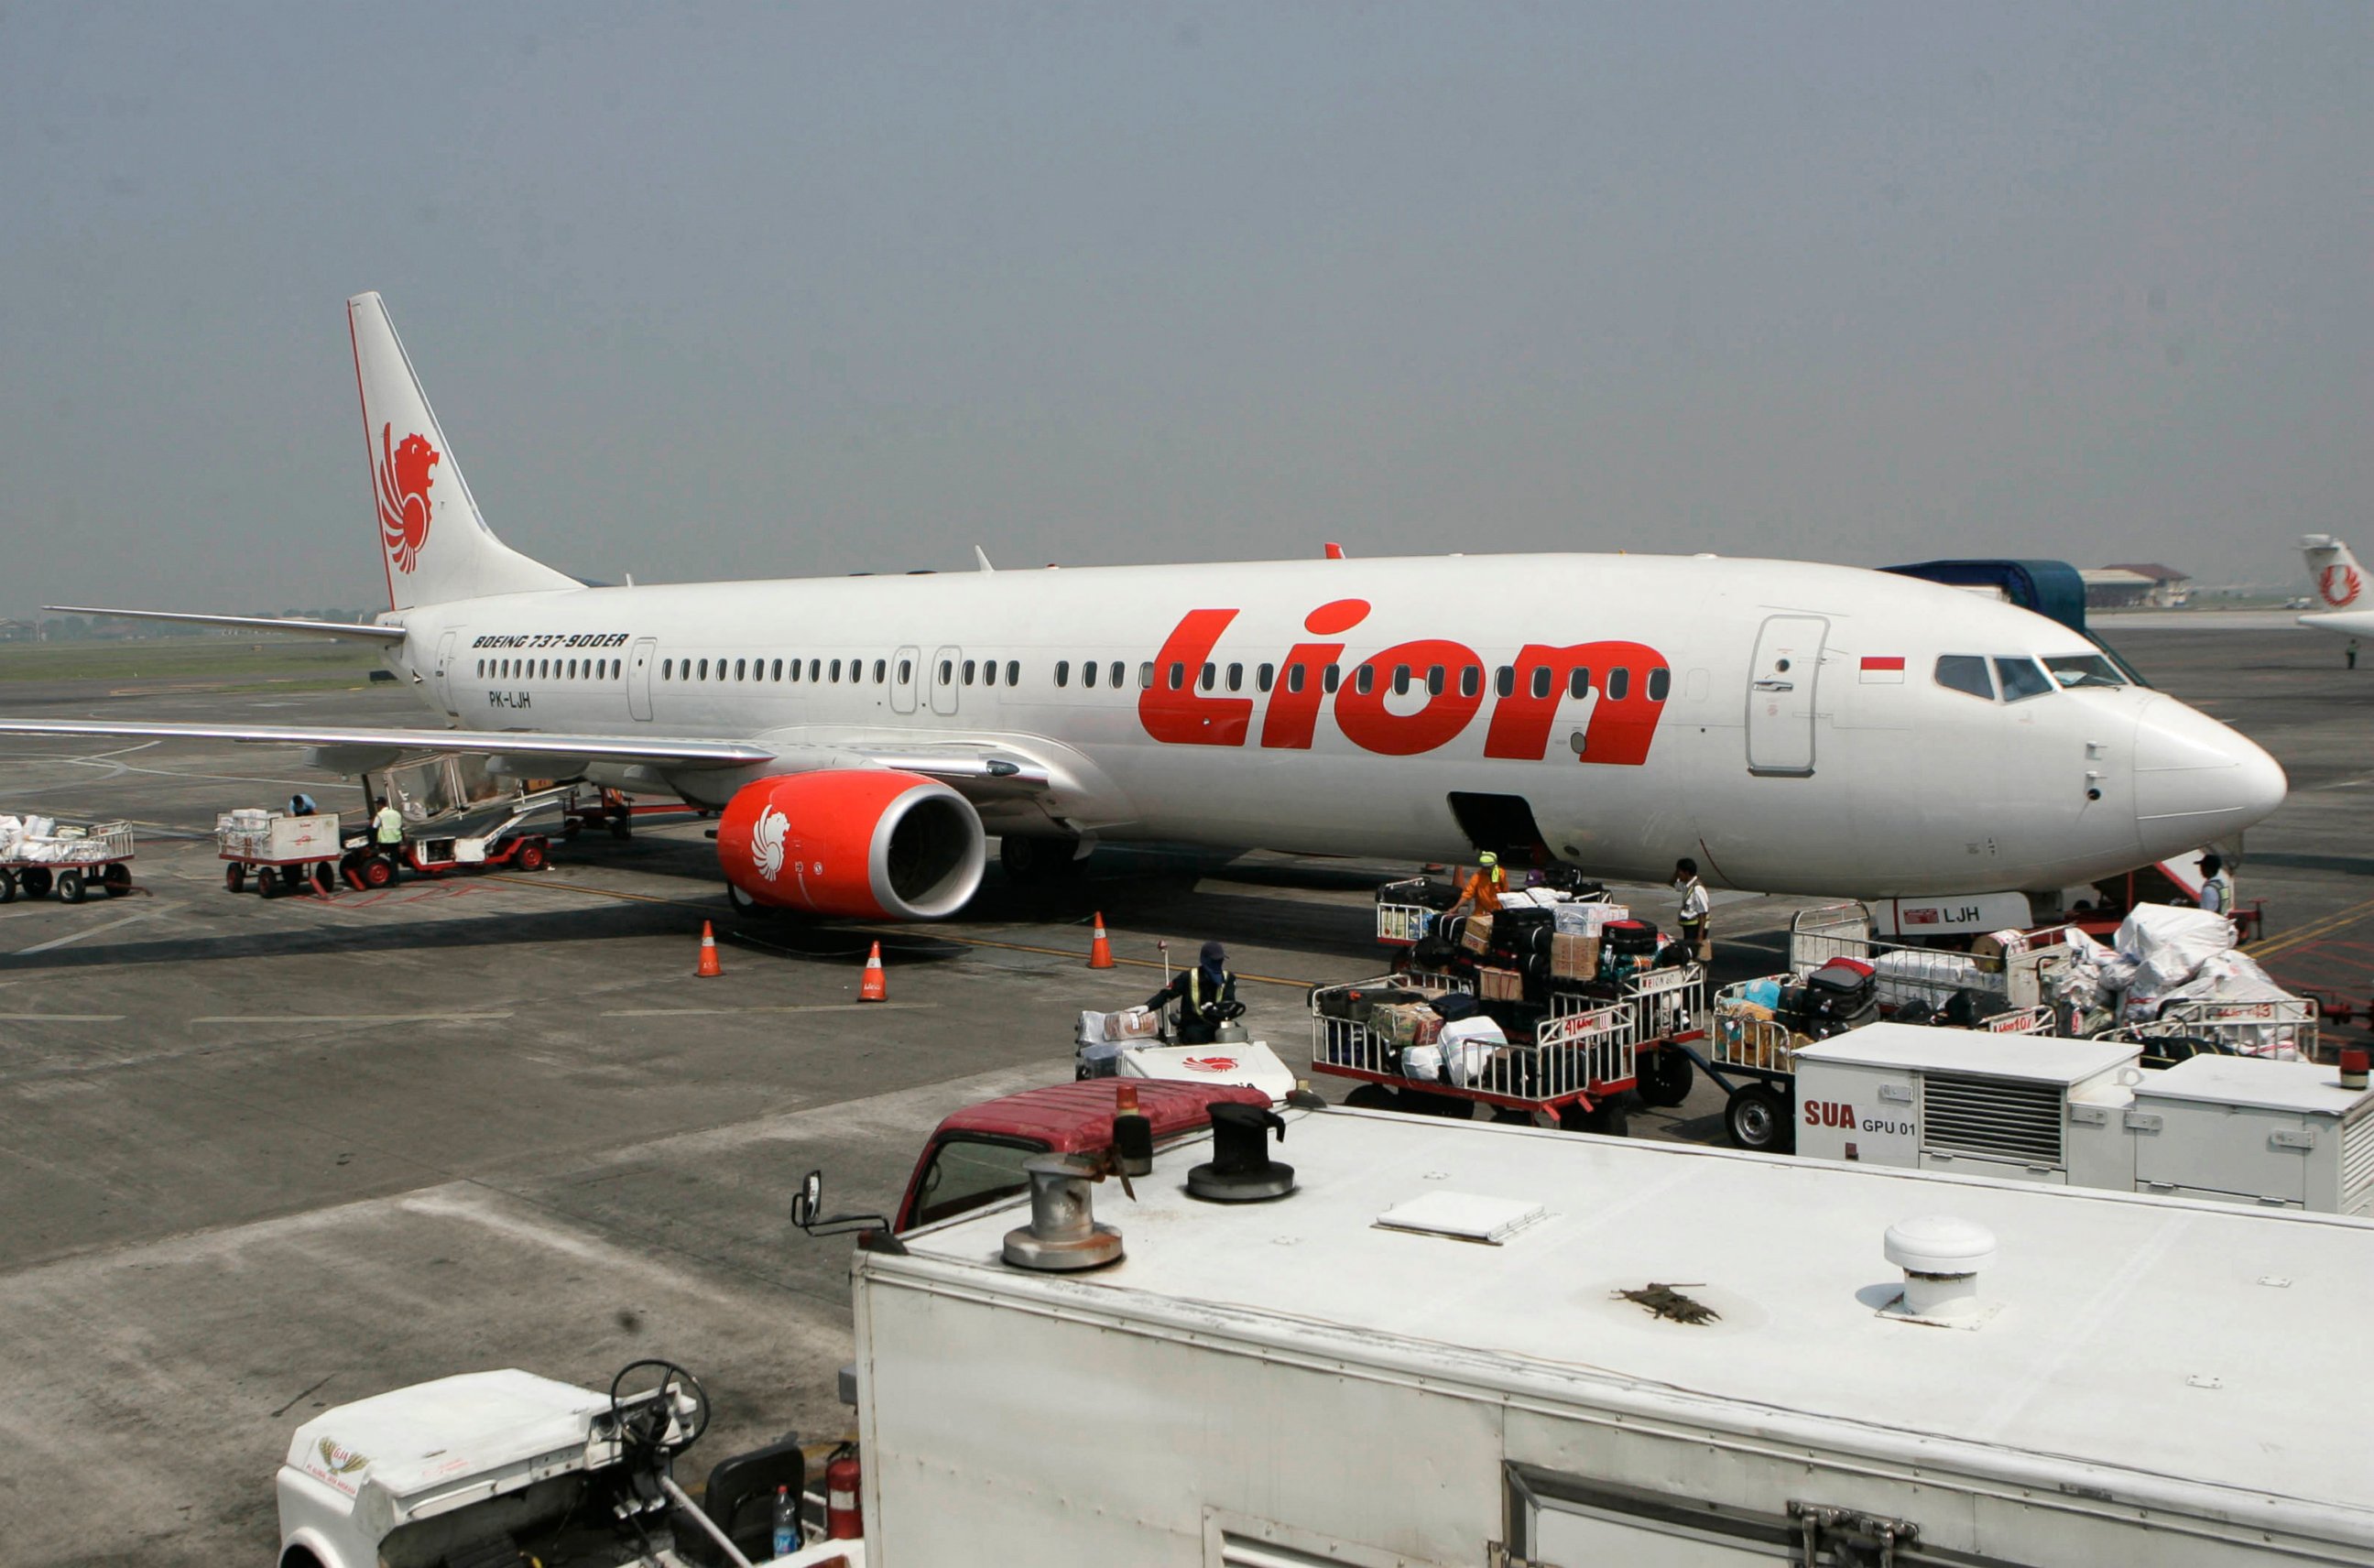 PHOTO: Indonesia. Indonesia's Lion Air said Monday, Oct. 29, 2018, it has lost contact with a passenger jet flying from Jakarta to an island off Sumatra.